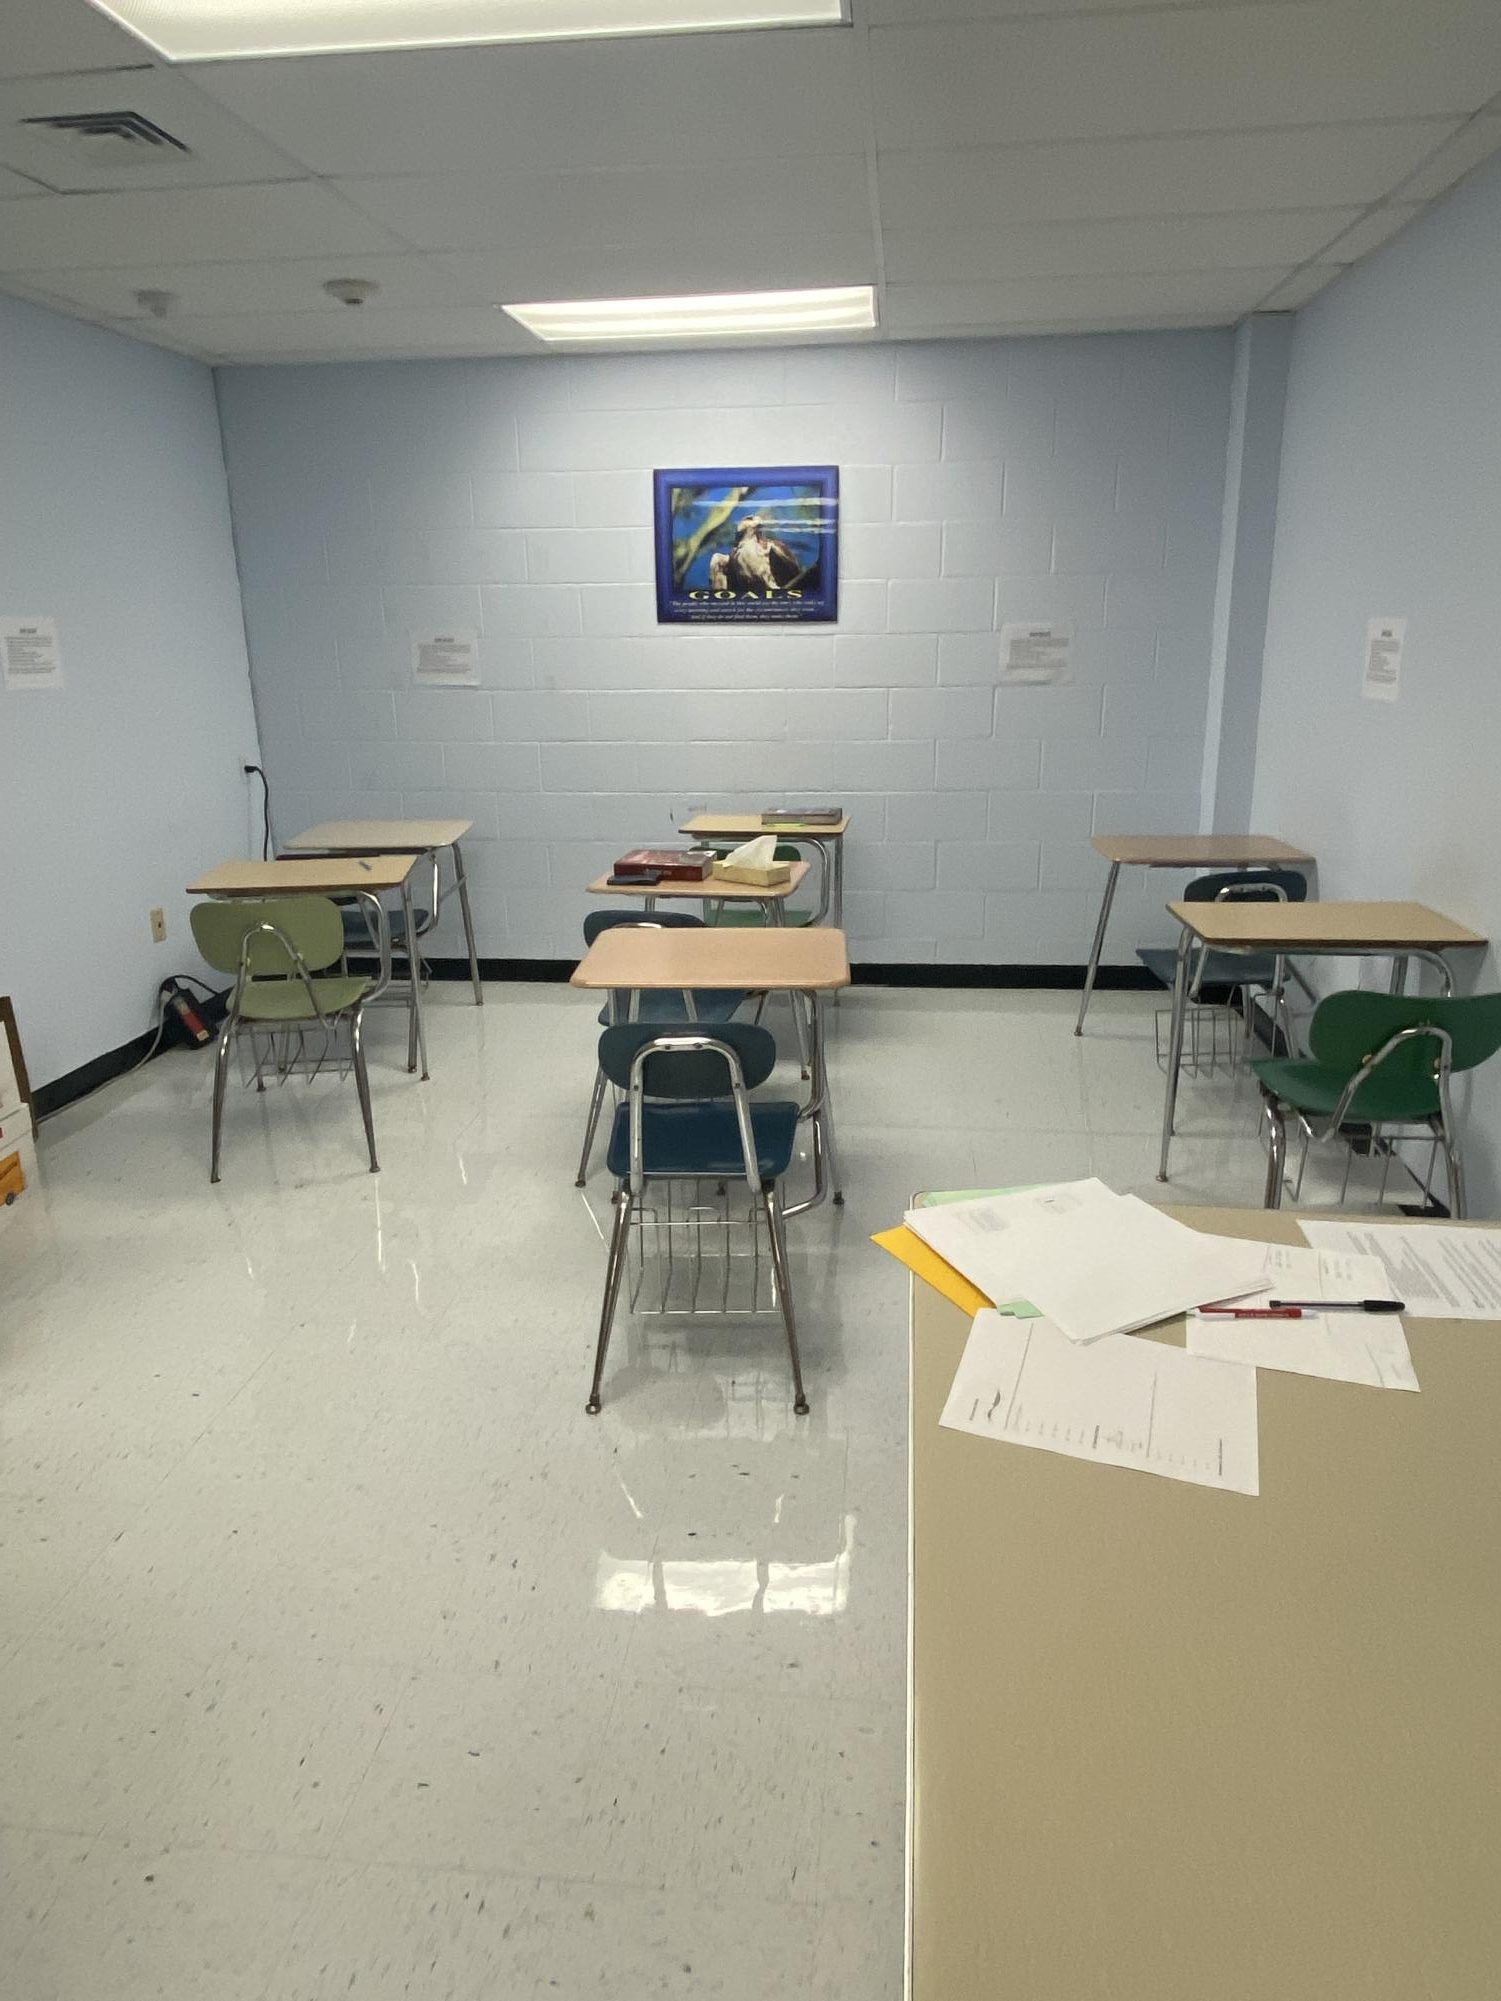 Students facing punishment for drug and alcohol use may spend time in the ISAP room